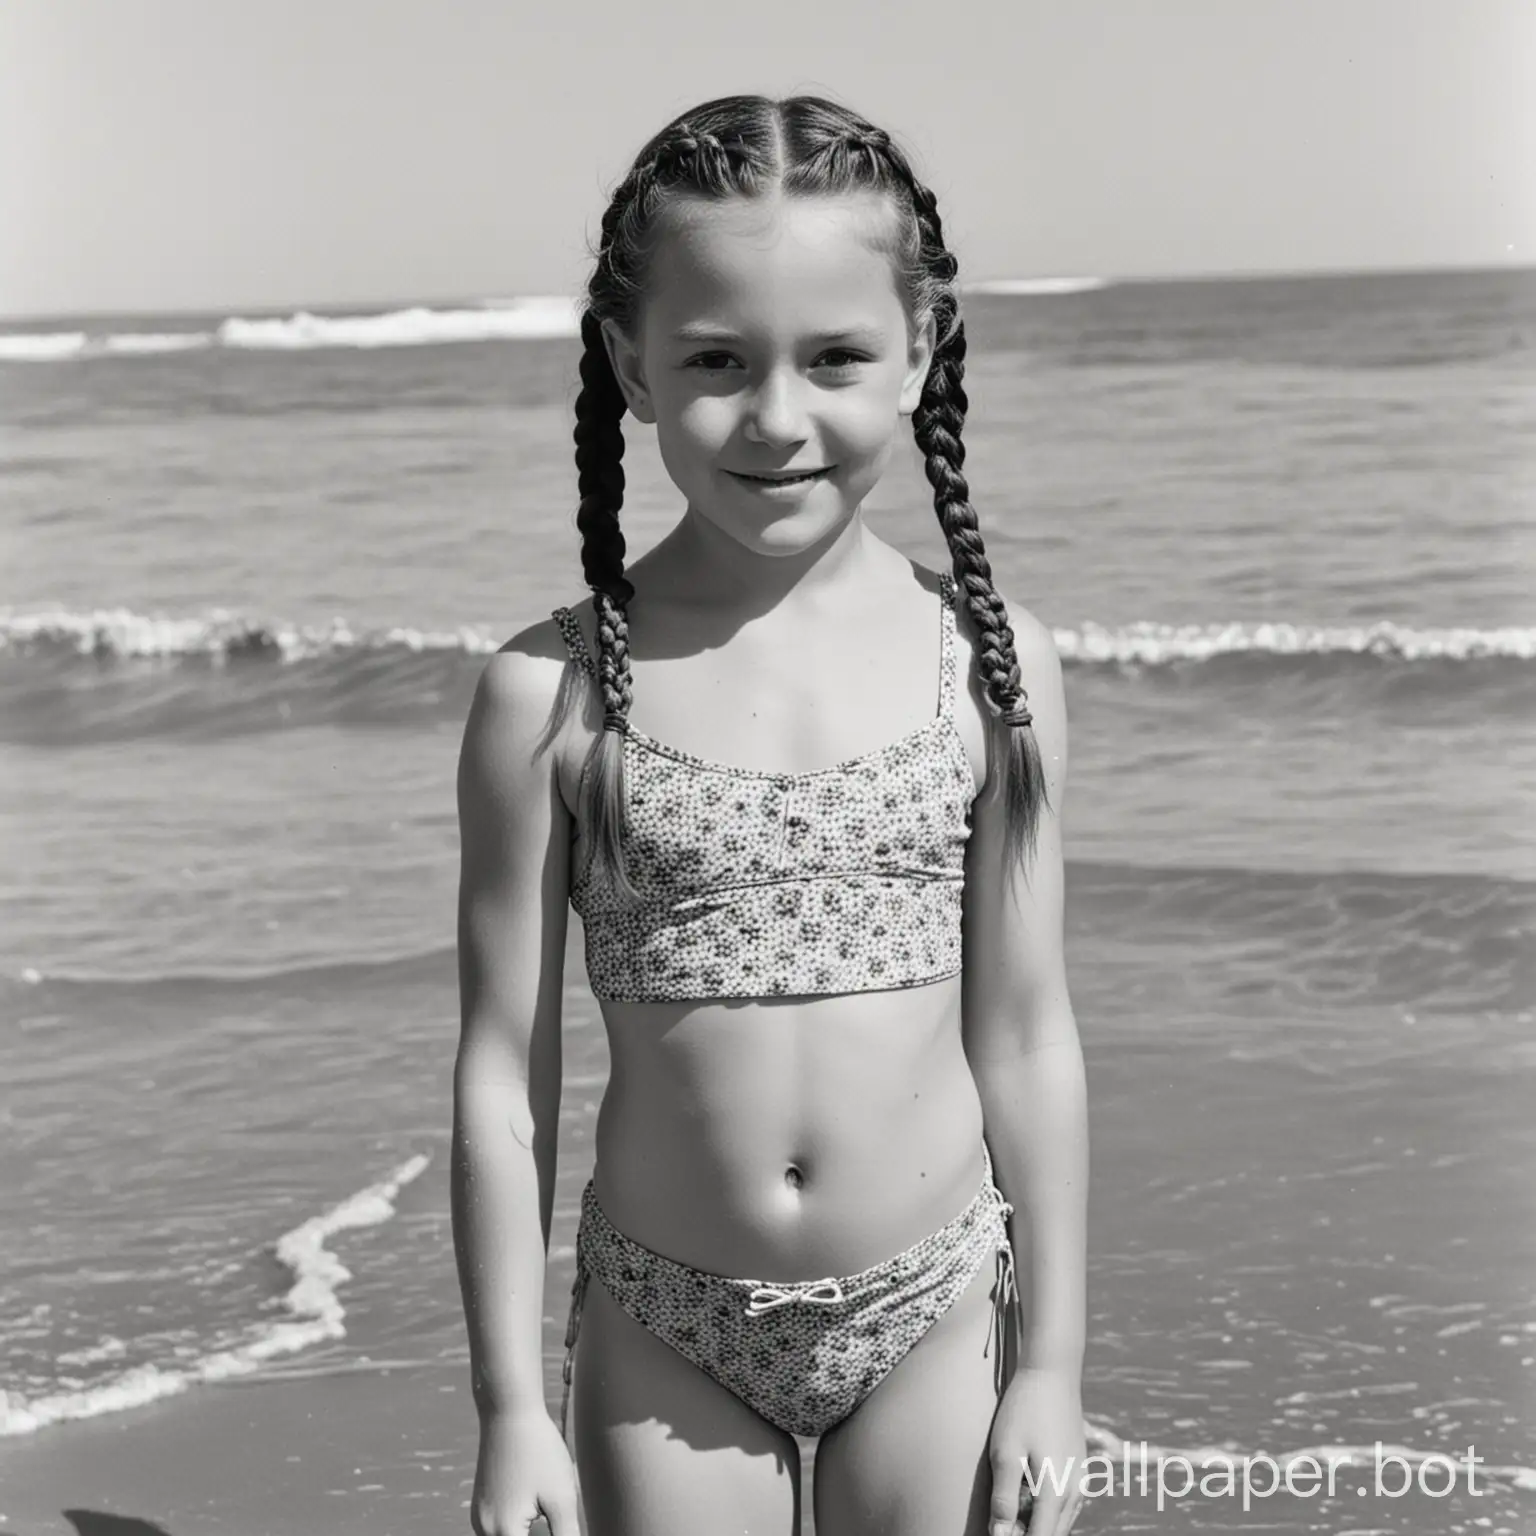 Ten-year-old in bathing suit with braids at the beach